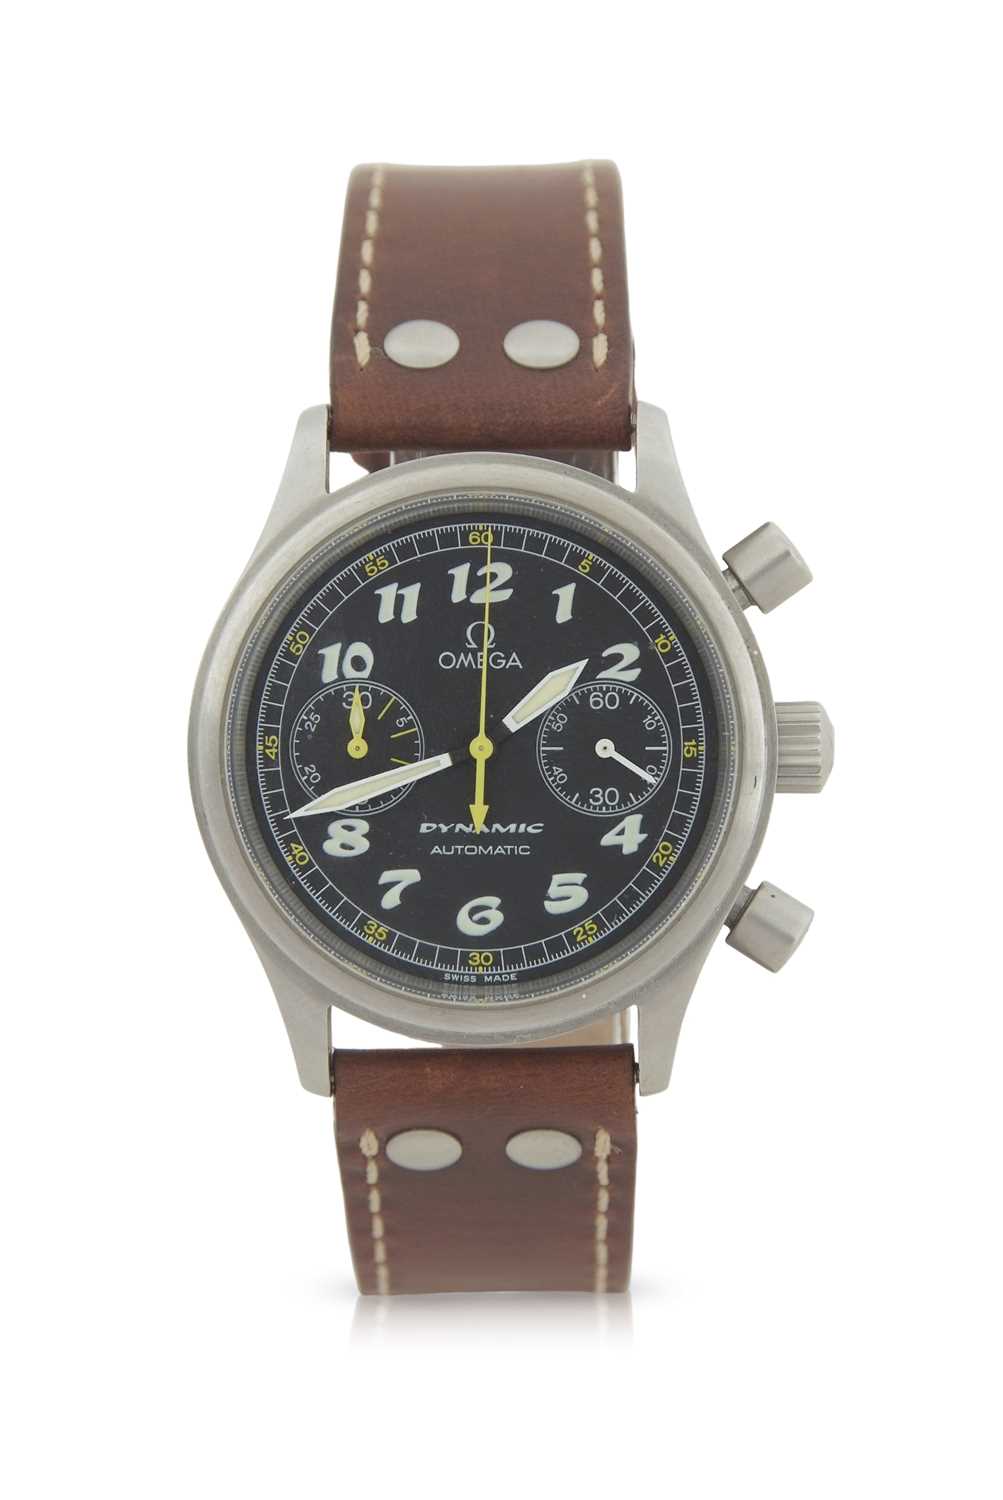 A Omega Dynamic Chronograph gents wristwatch, the watch has an automatic 44 jewel movement and a